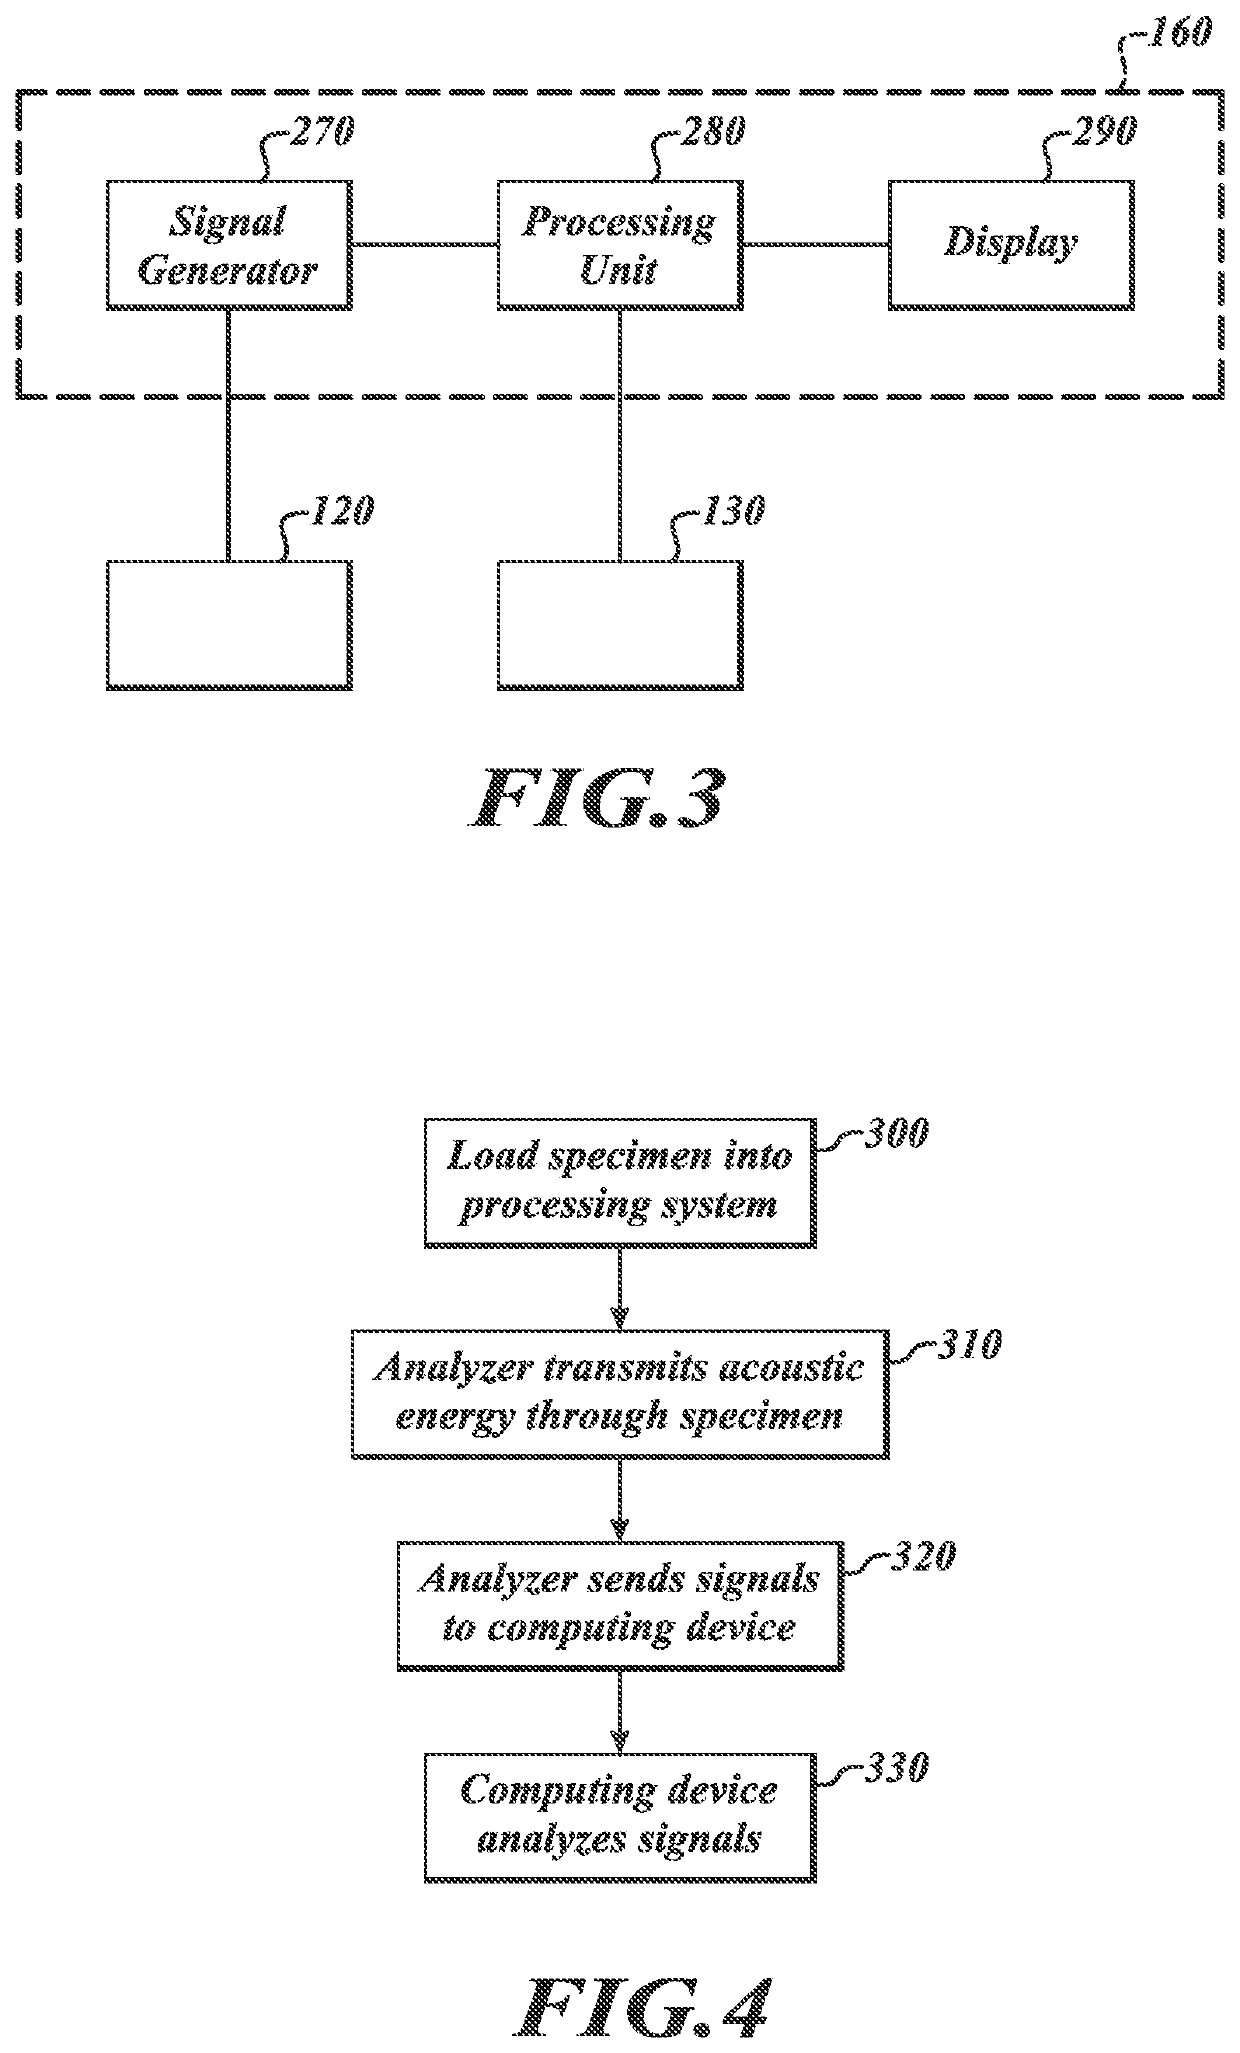 Systems and methods for monitoring tissue sample processing